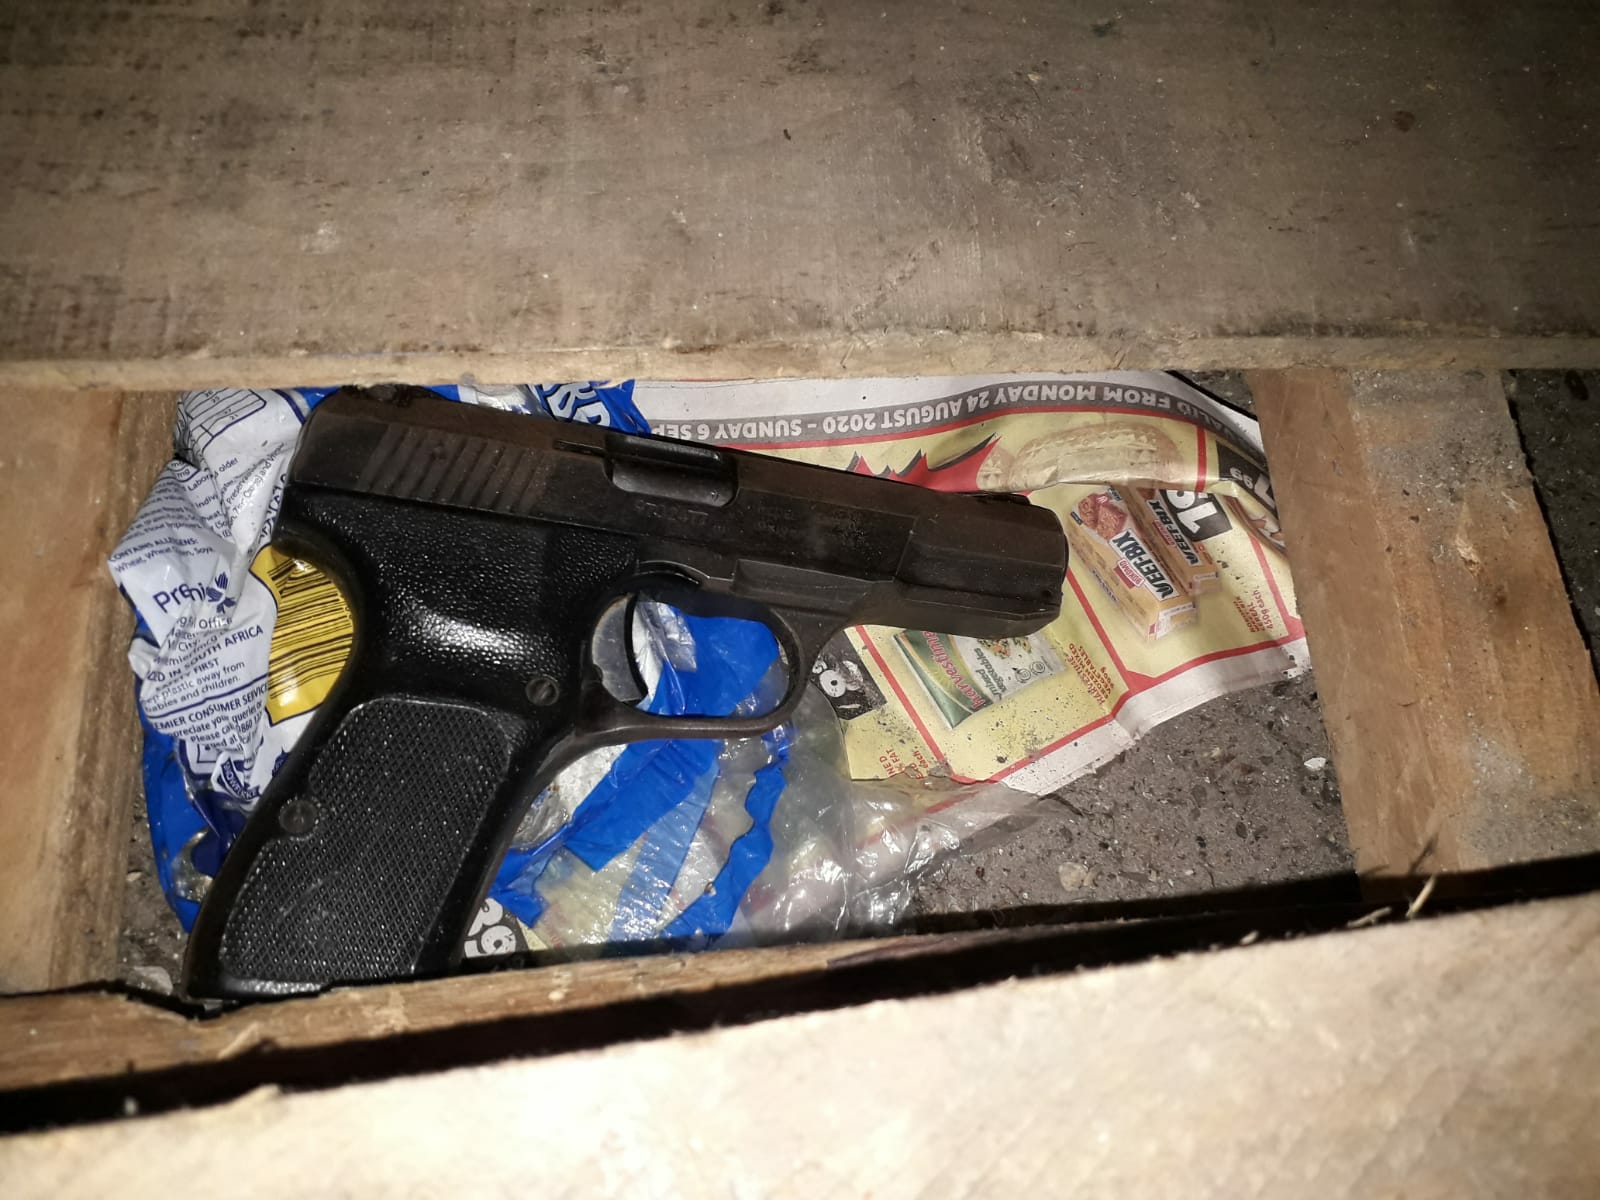 Suspect (19) arrested for possession of unlicensed firearm and ammunition in Kraaifontein